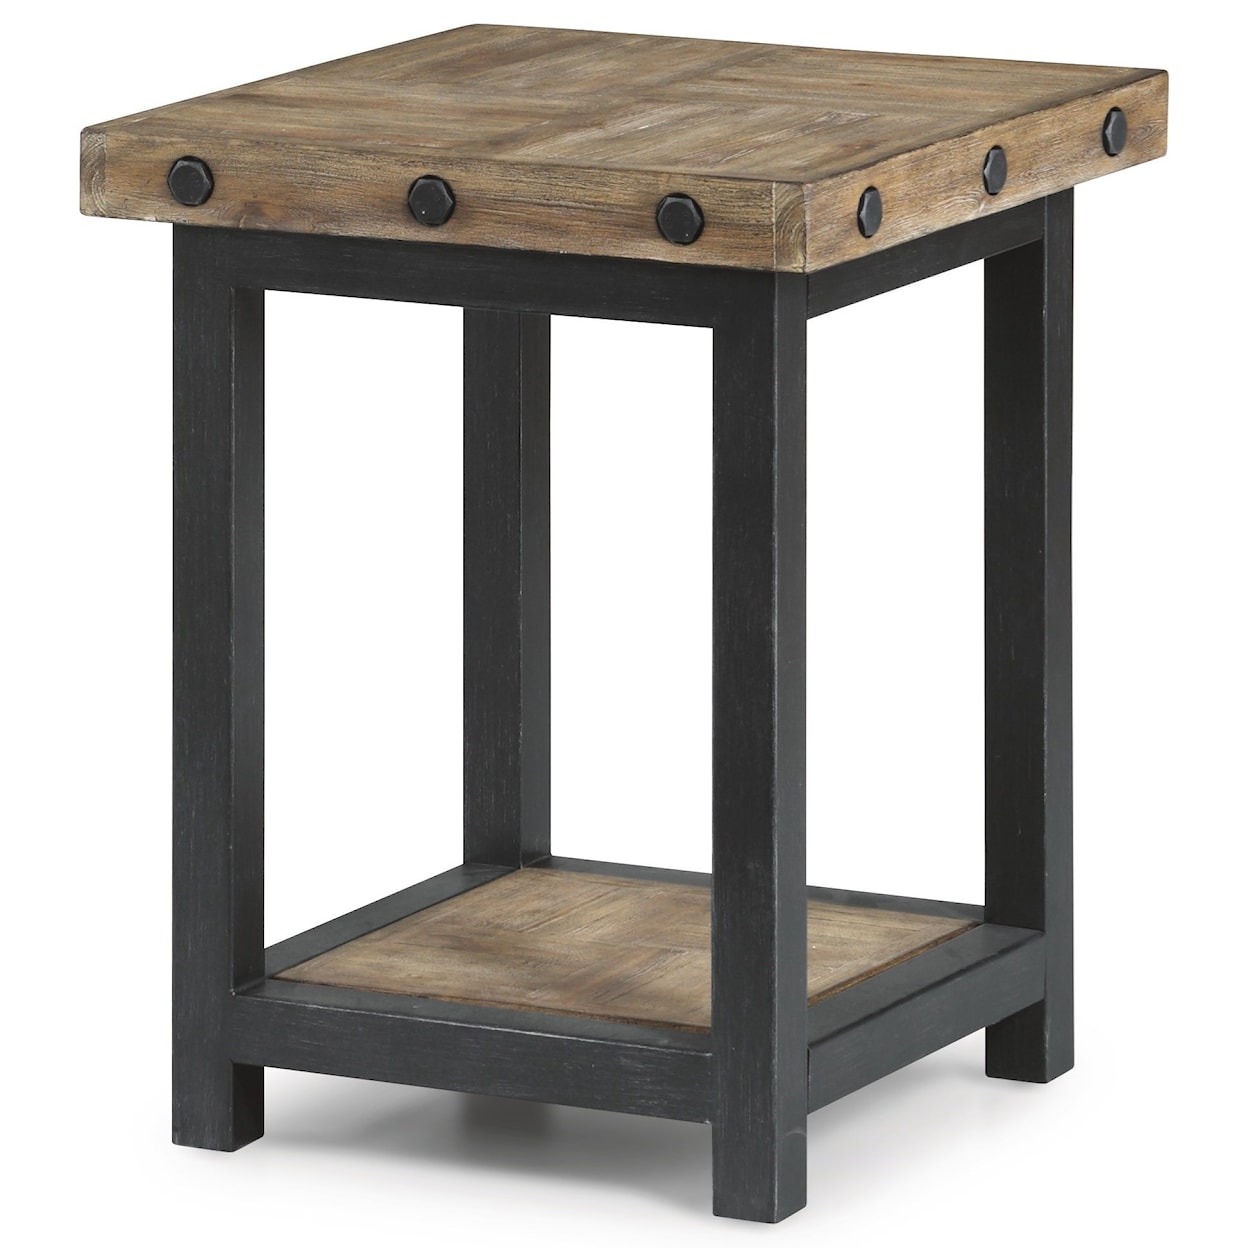 Flexsteel Wynwood Collection Carpenter Chair Side Table